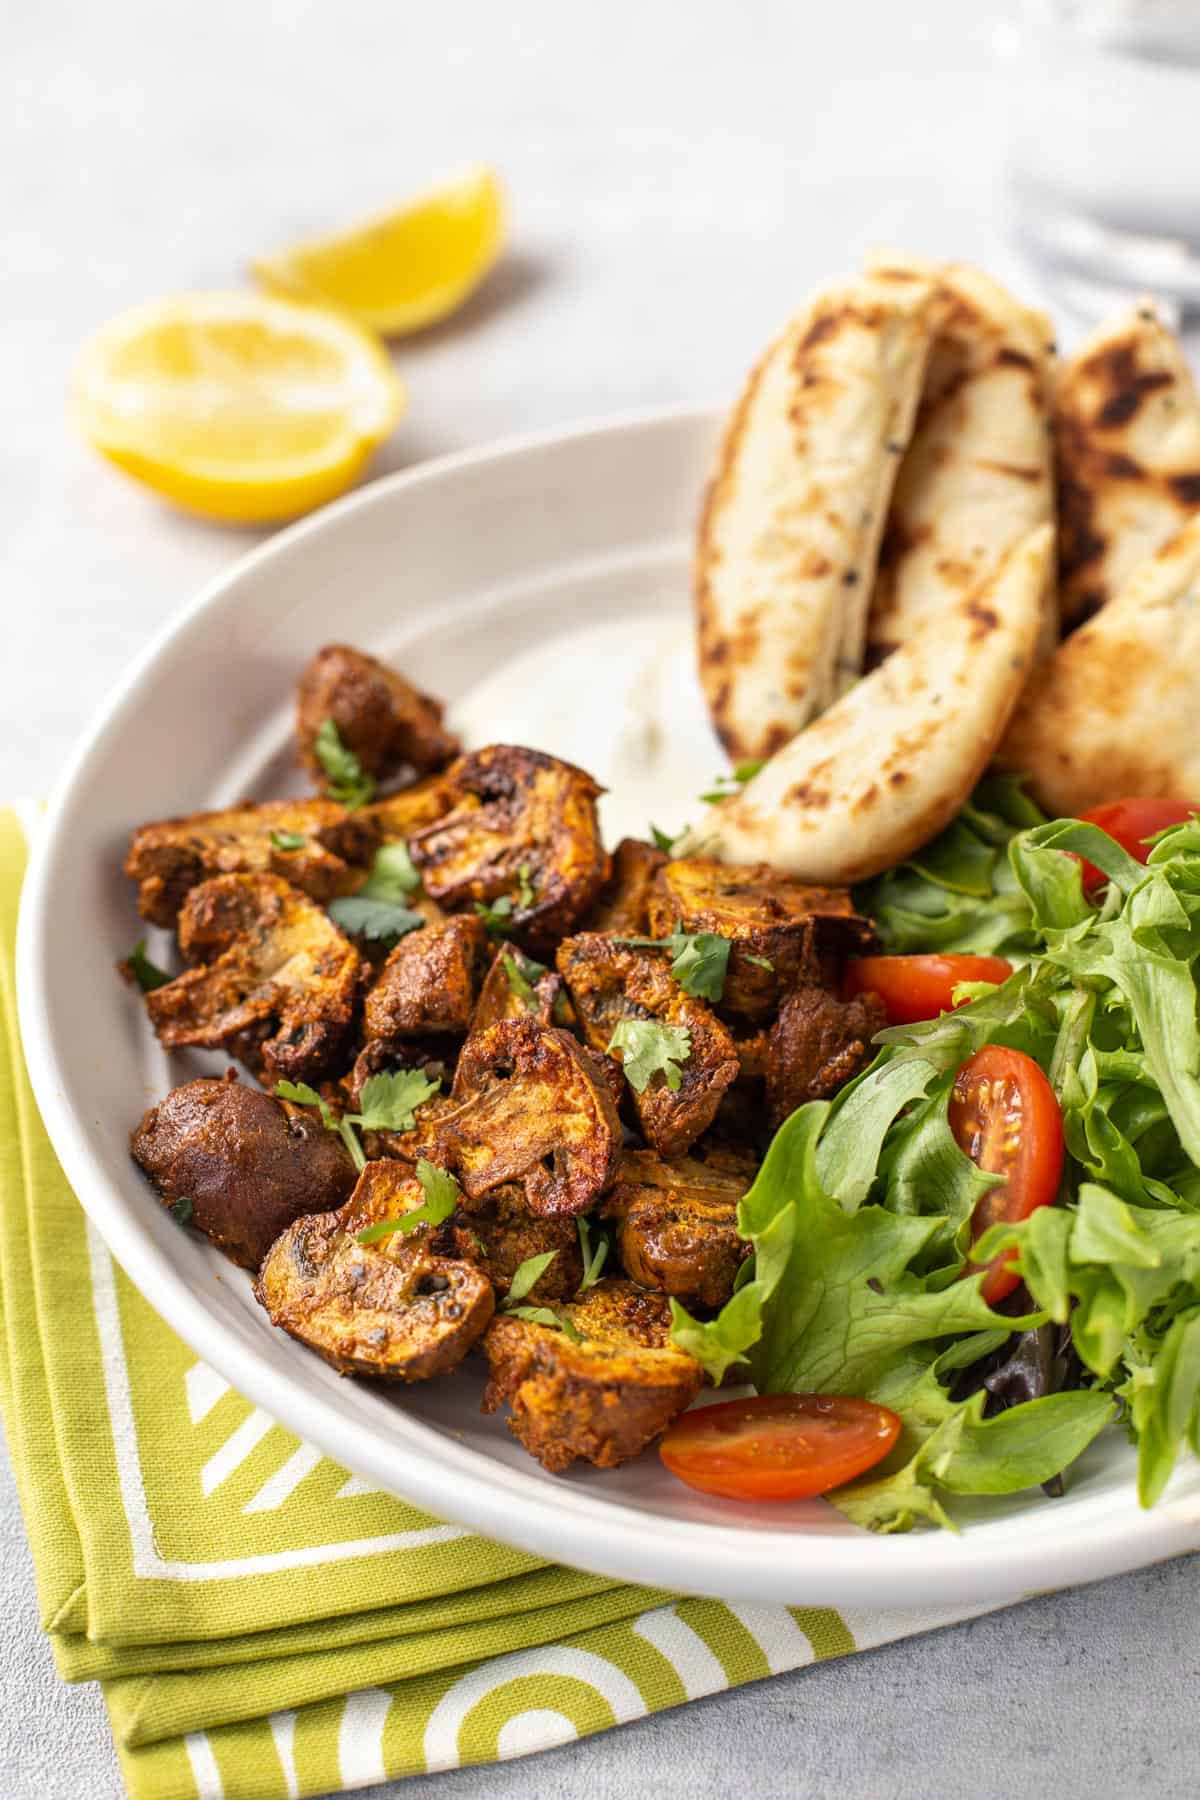 Mushroom tikka in a bowl with naan bread and salad.